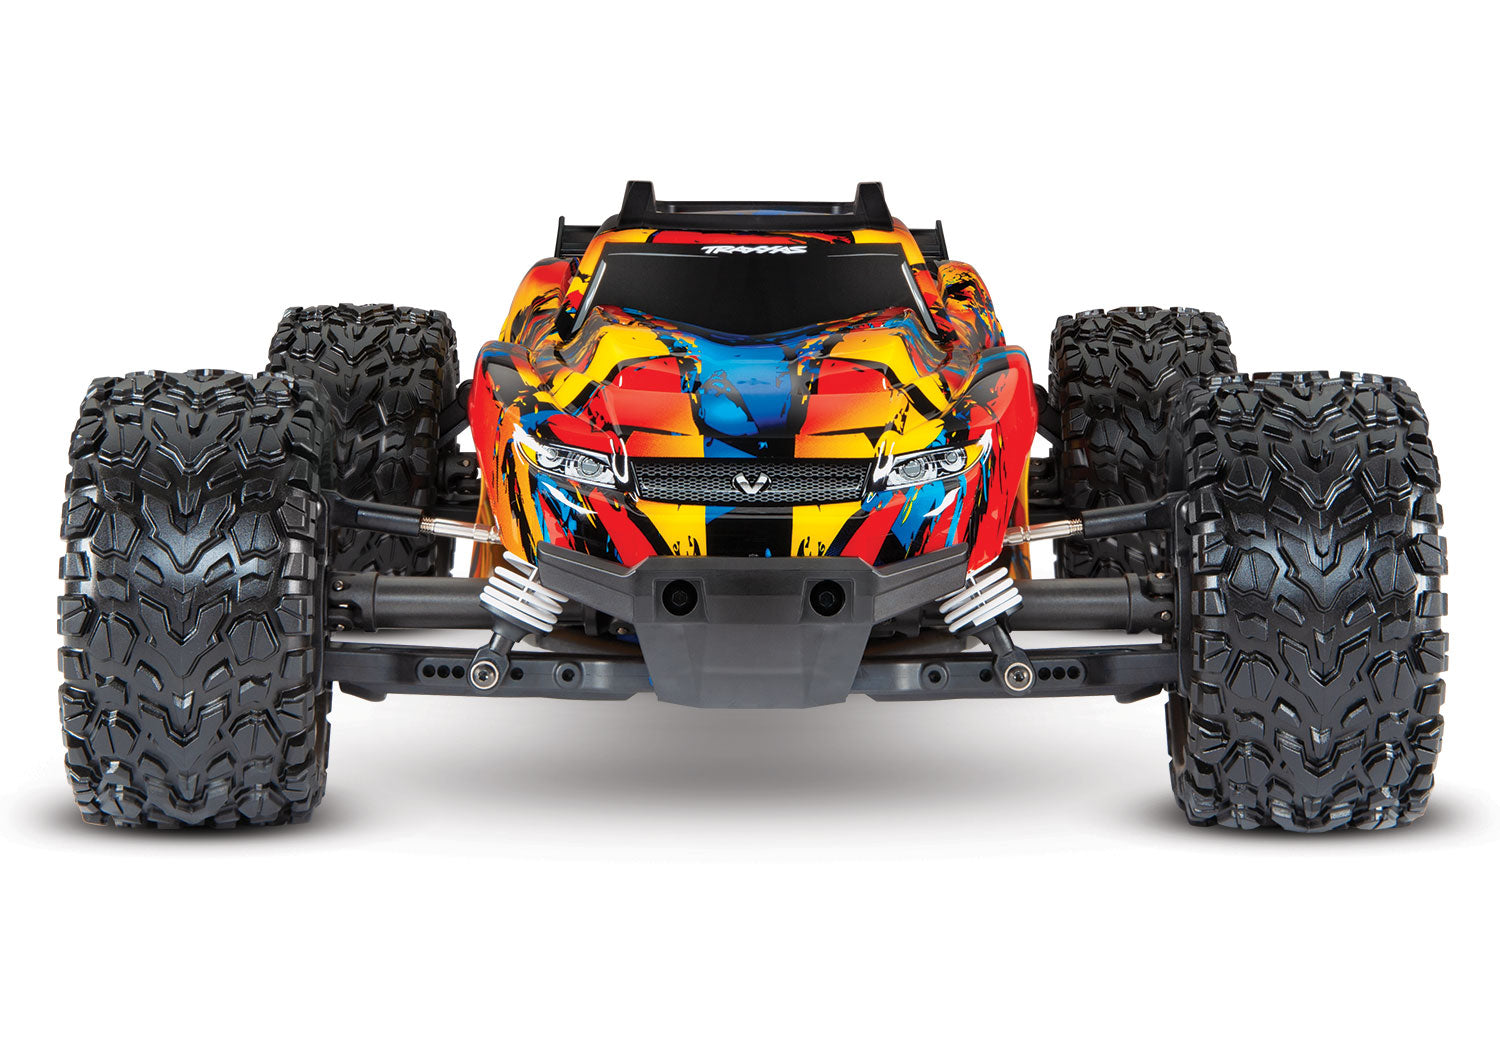 SOLAR FLARE Rustler® 4X4 VXL: 1/10 Scale Stadium Truck with TQi™ Traxxas Link™ Enabled 2.4GHz Radio System and Traxxas Stability Management (TSM)®